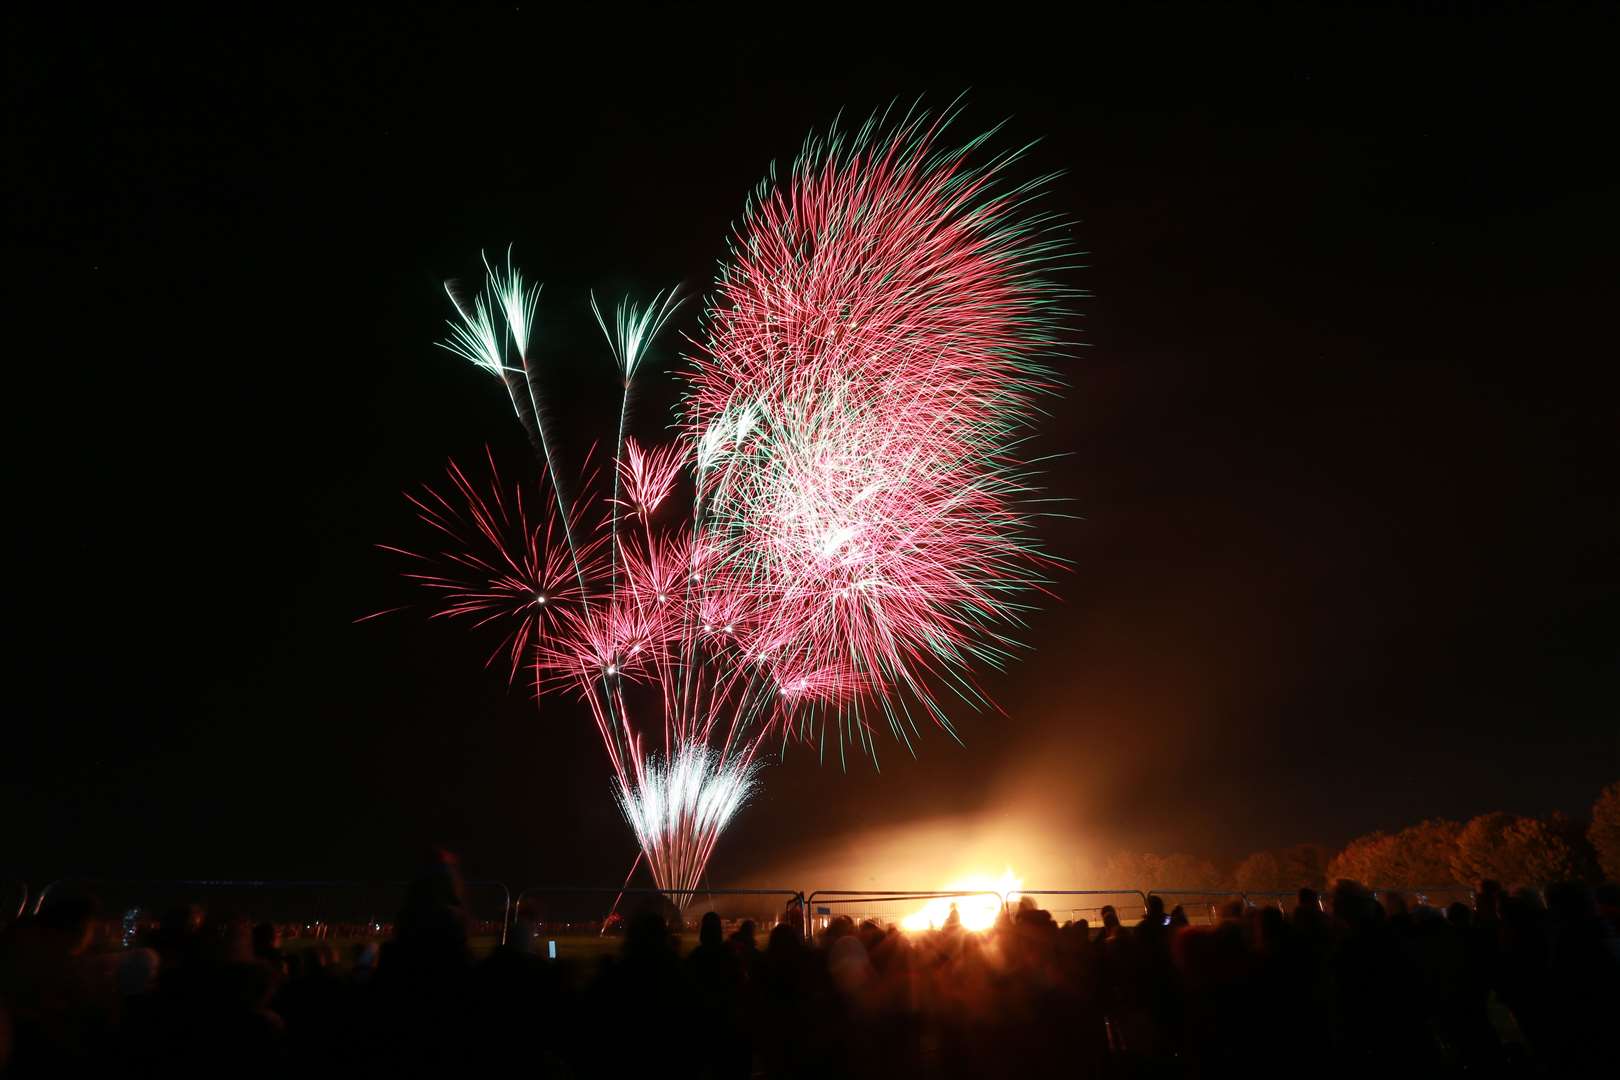 The fireworks display at the Great Lines Heritage Park. Picture by: John Westhrop